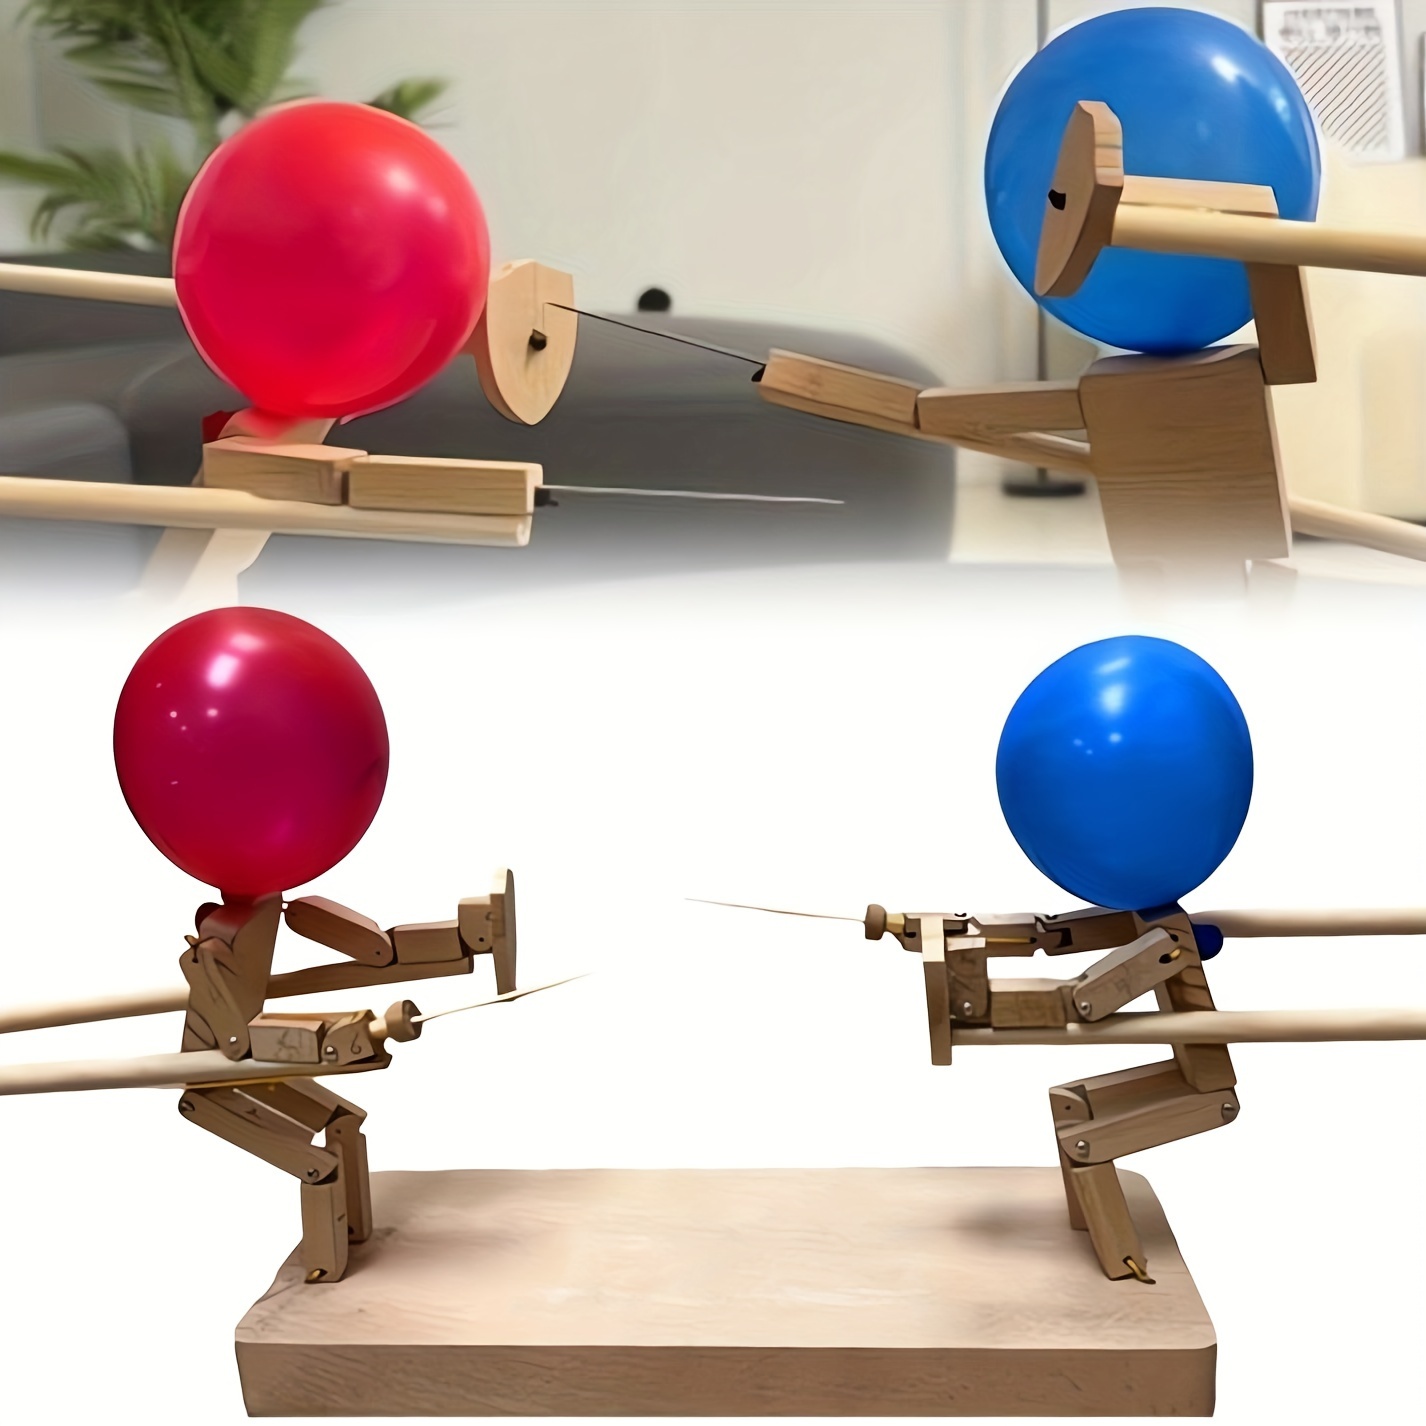 

Balloon Bamboo Man Battle - Wooden Battle Game For 2 Players, Fast-paced Balloon Fight